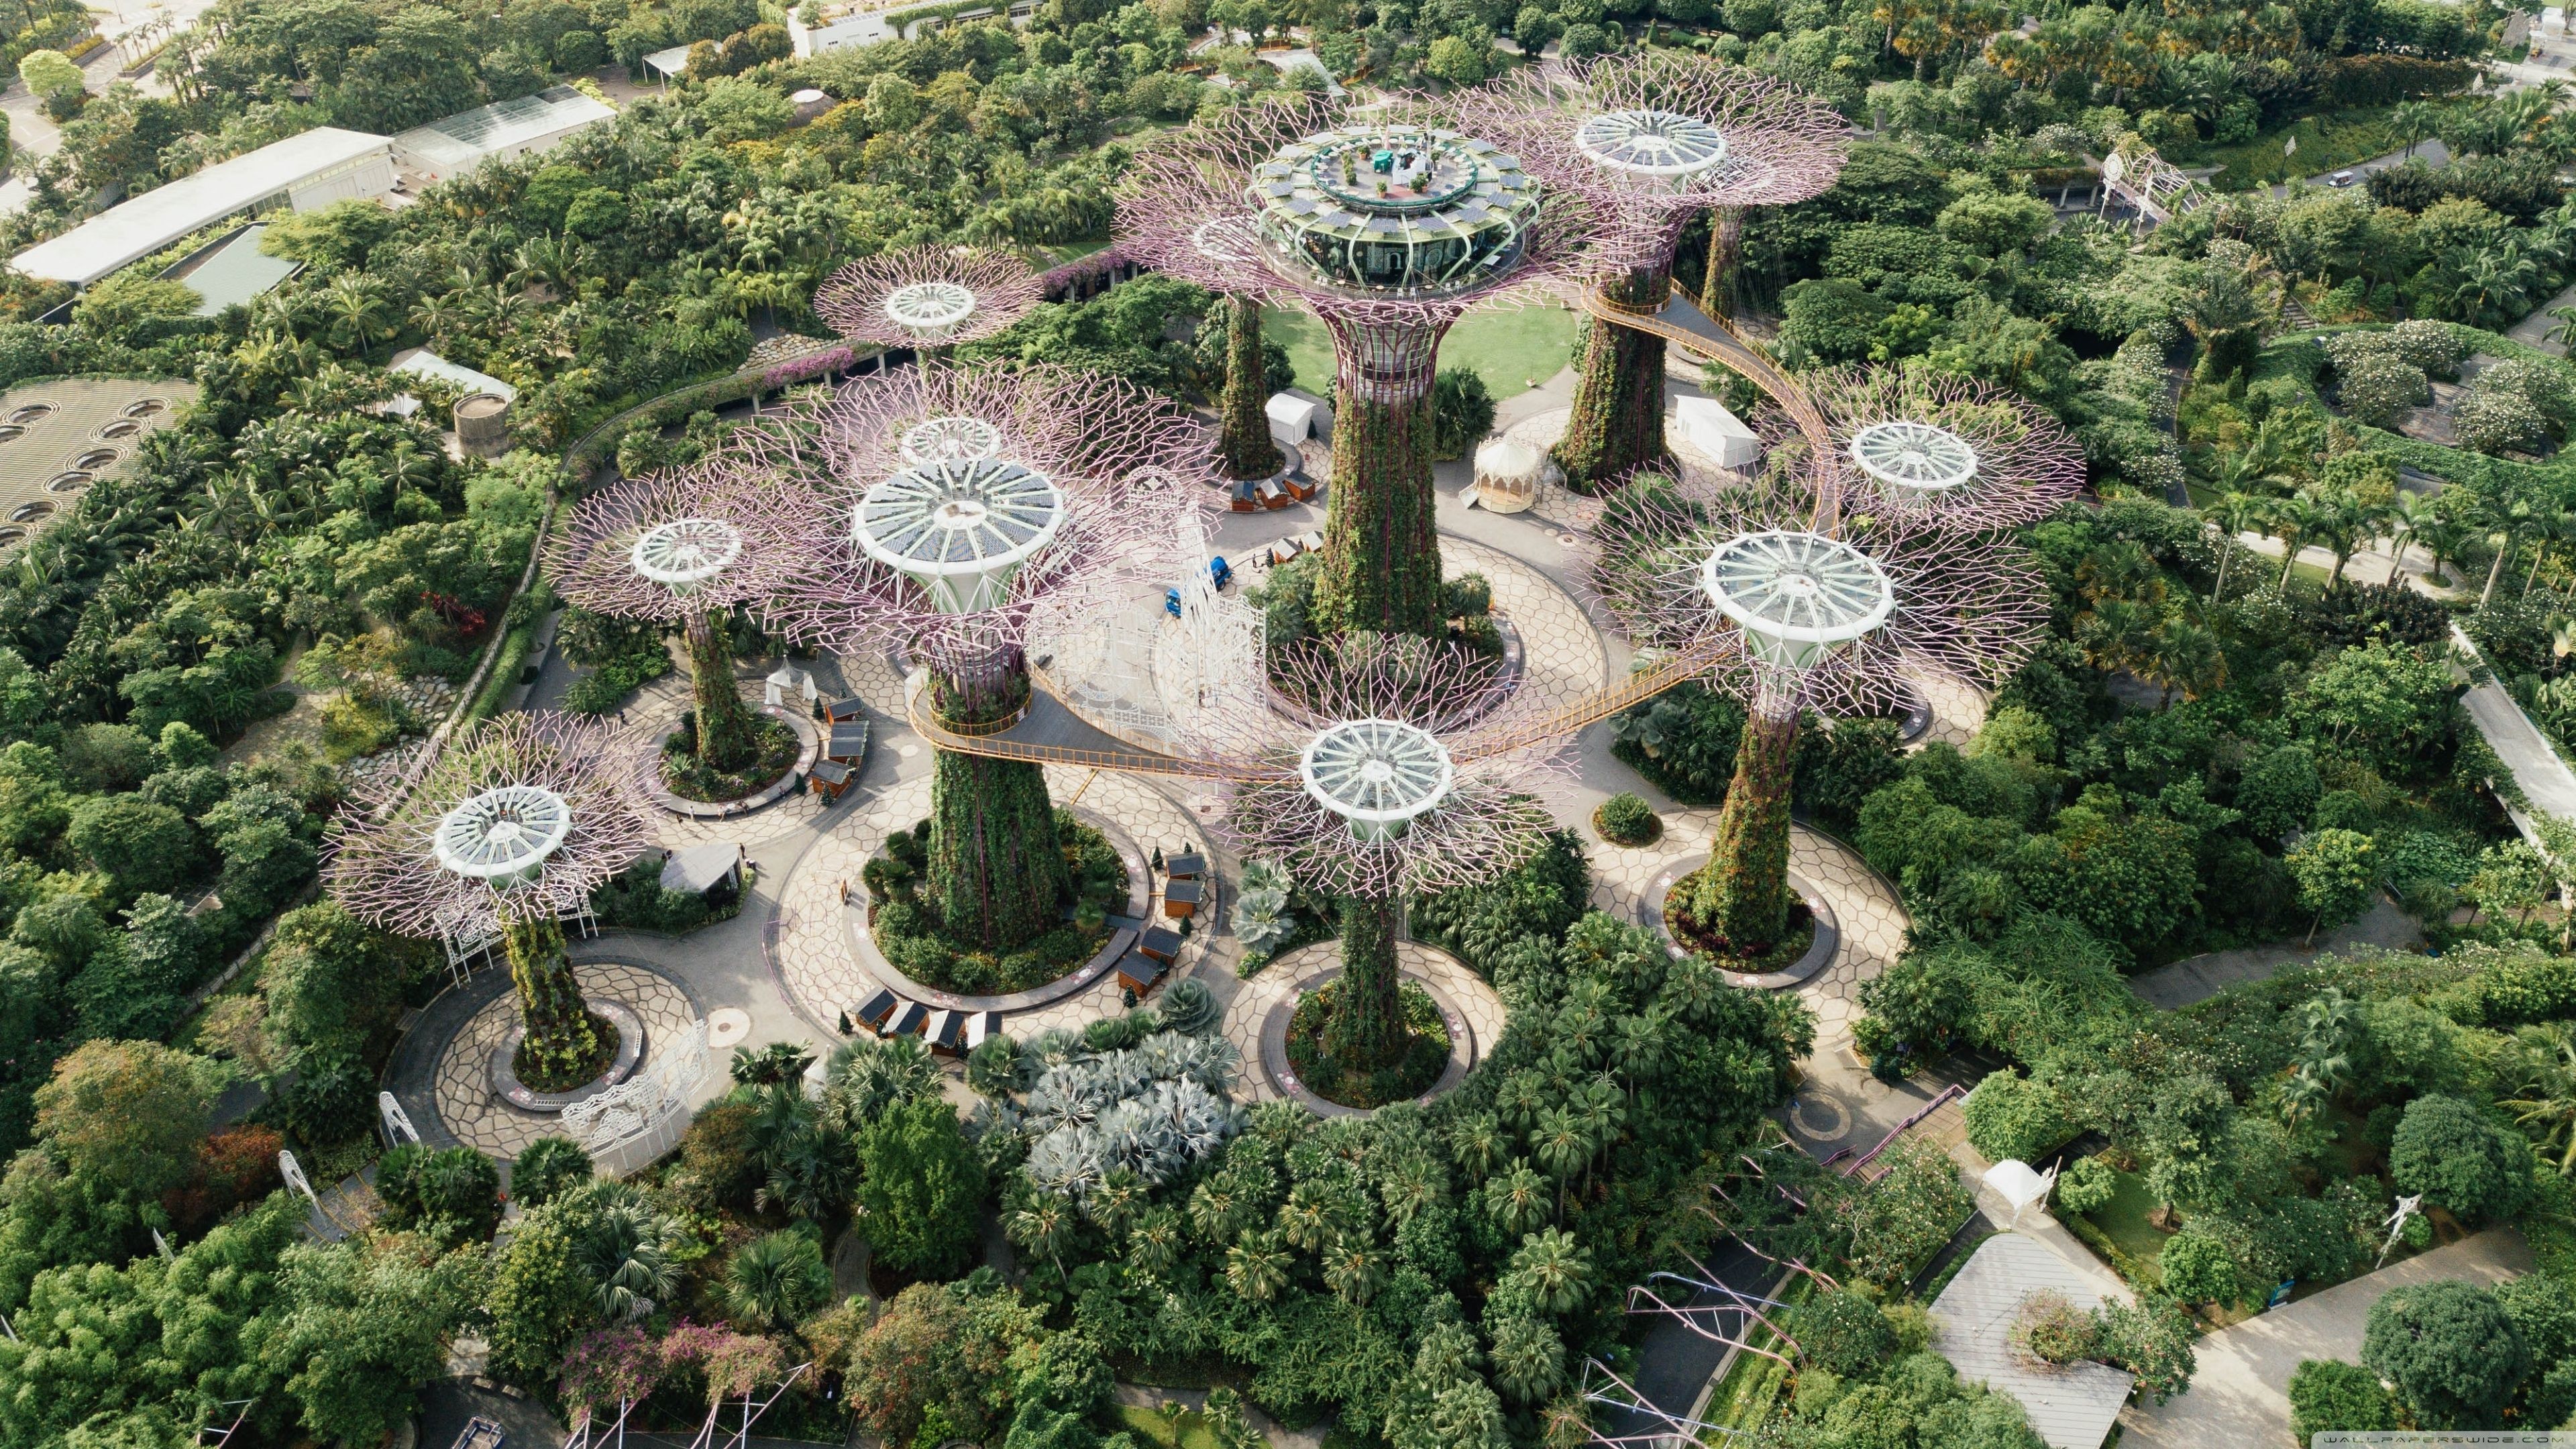 Supertrees, Gardens by the Bay, Singapore Eco City Aerial View Ultra HD Desktop Background Wallpaper for 4K UHD TV, Widescreen & UltraWide Desktop & Laptop, Tablet